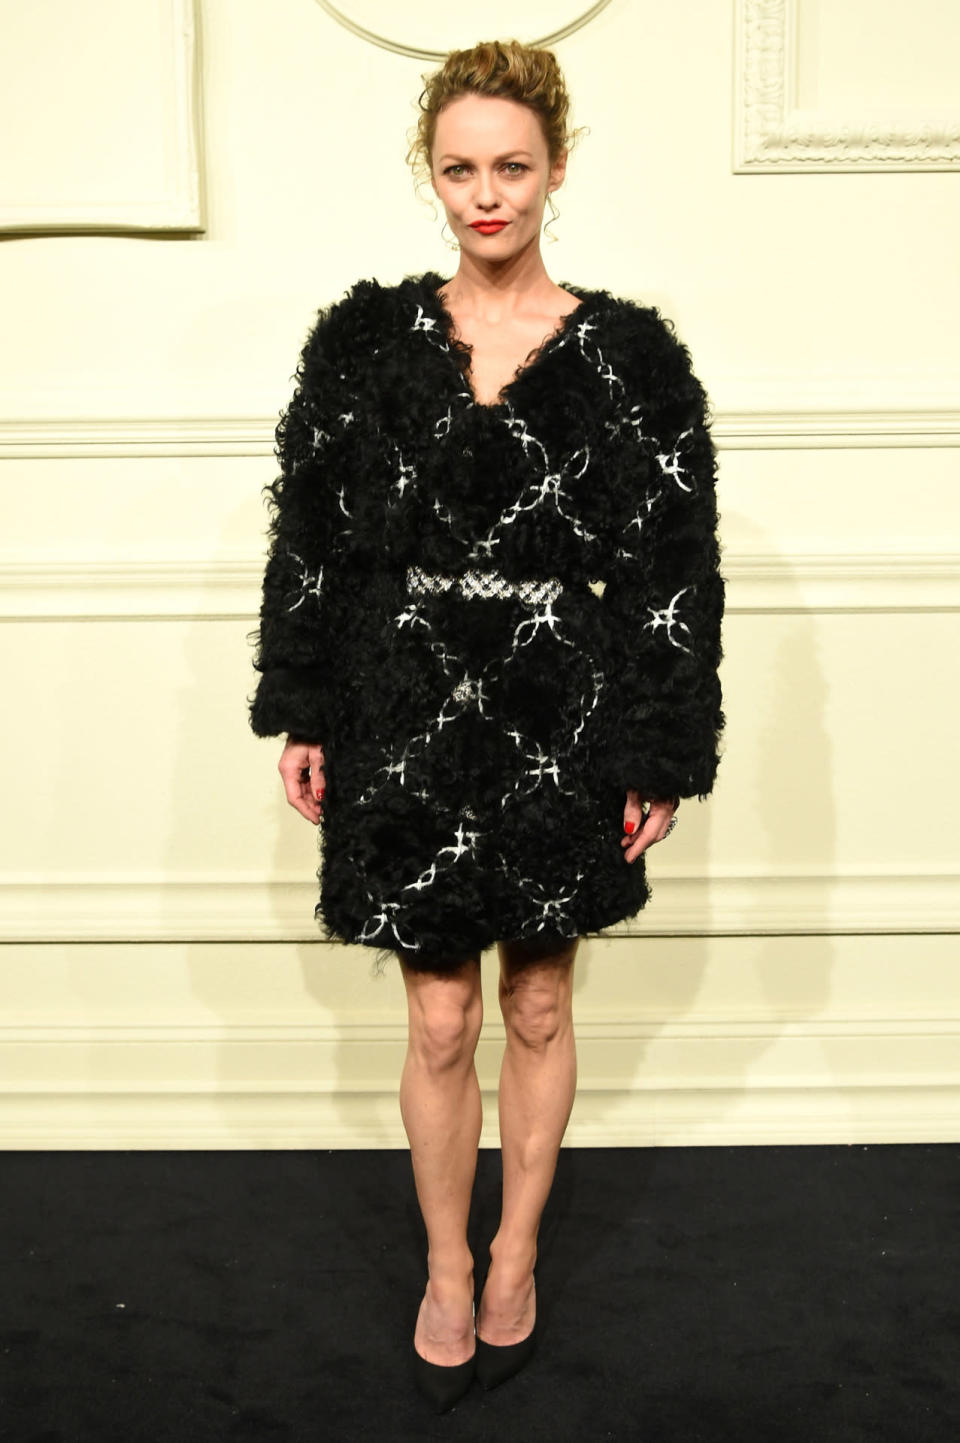 <p>Vanessa Paradis attends the CHANEL Paris-Salzburg 2014/15 Metiers d'Art Collection</p><p>Vanessa Paradis has been modeling for Chanel since 1991, but Tuesday night marked her family’s first fashion outing. She brought daughter Lily-Rose Depp and son Jack to the brand’s Paris-Salzburg 2014/15 Metiers d'Art Collection in New York. Of the city, she said, “<span>I lived here a long time ago and each time I’m back it just fills my heart with sparkles. I love it. It’s really awesome.” </span></p>